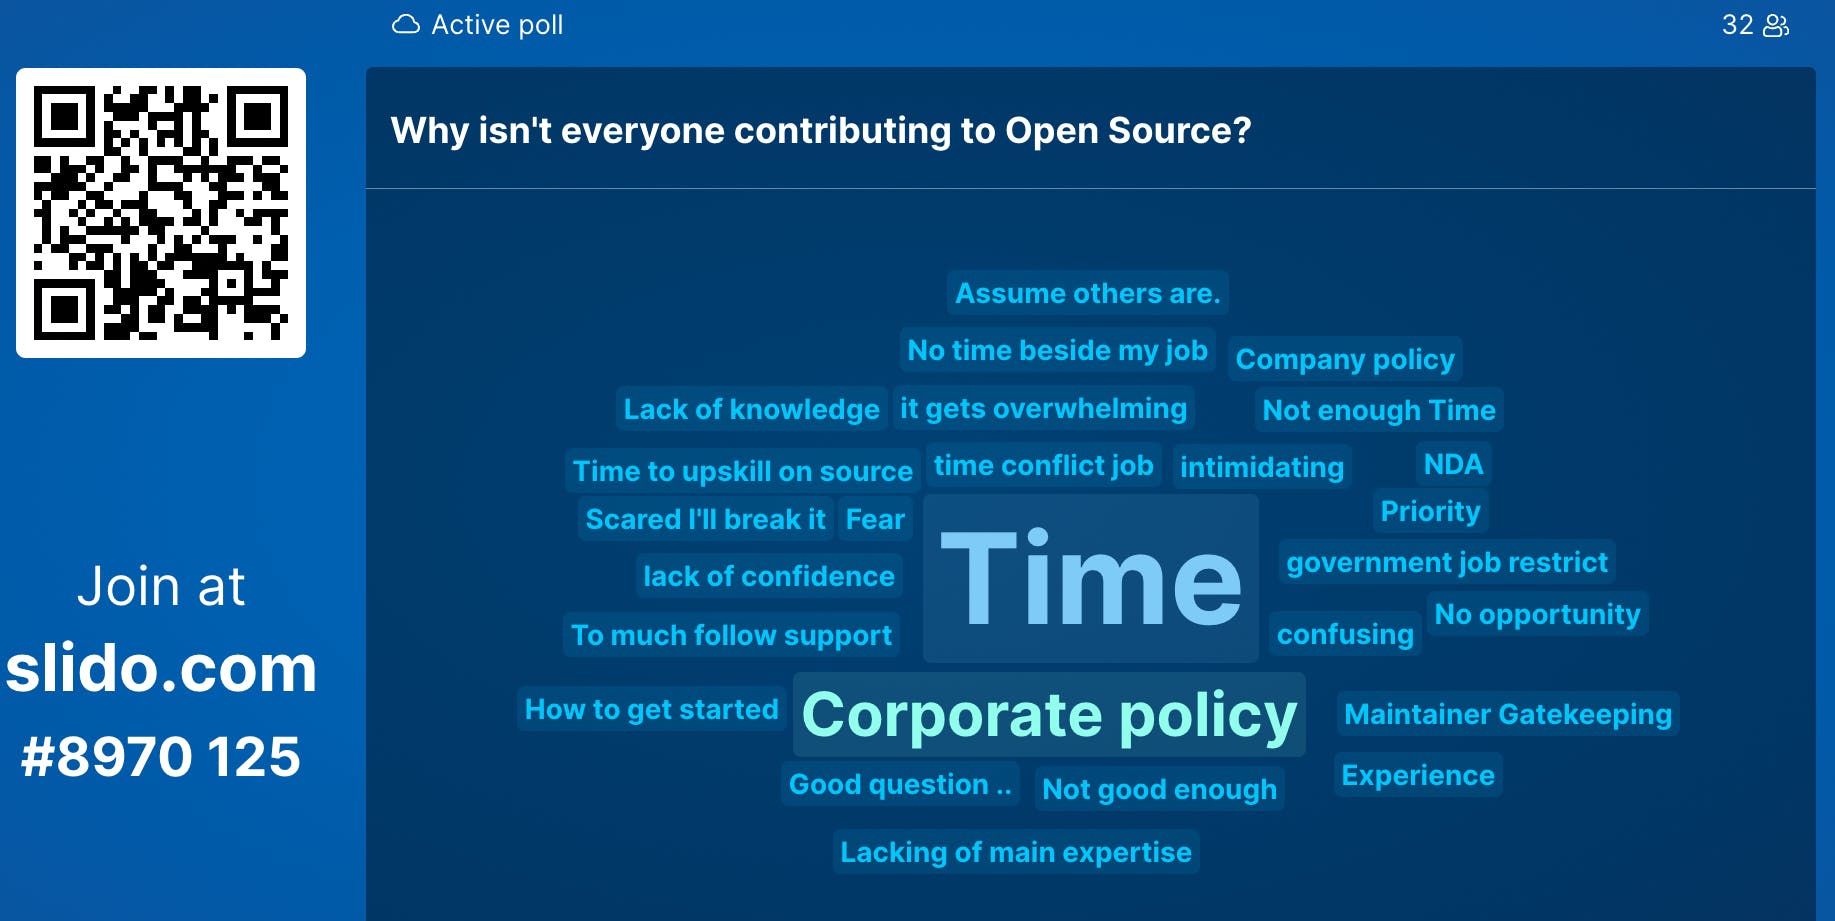 Second poll on Open Source